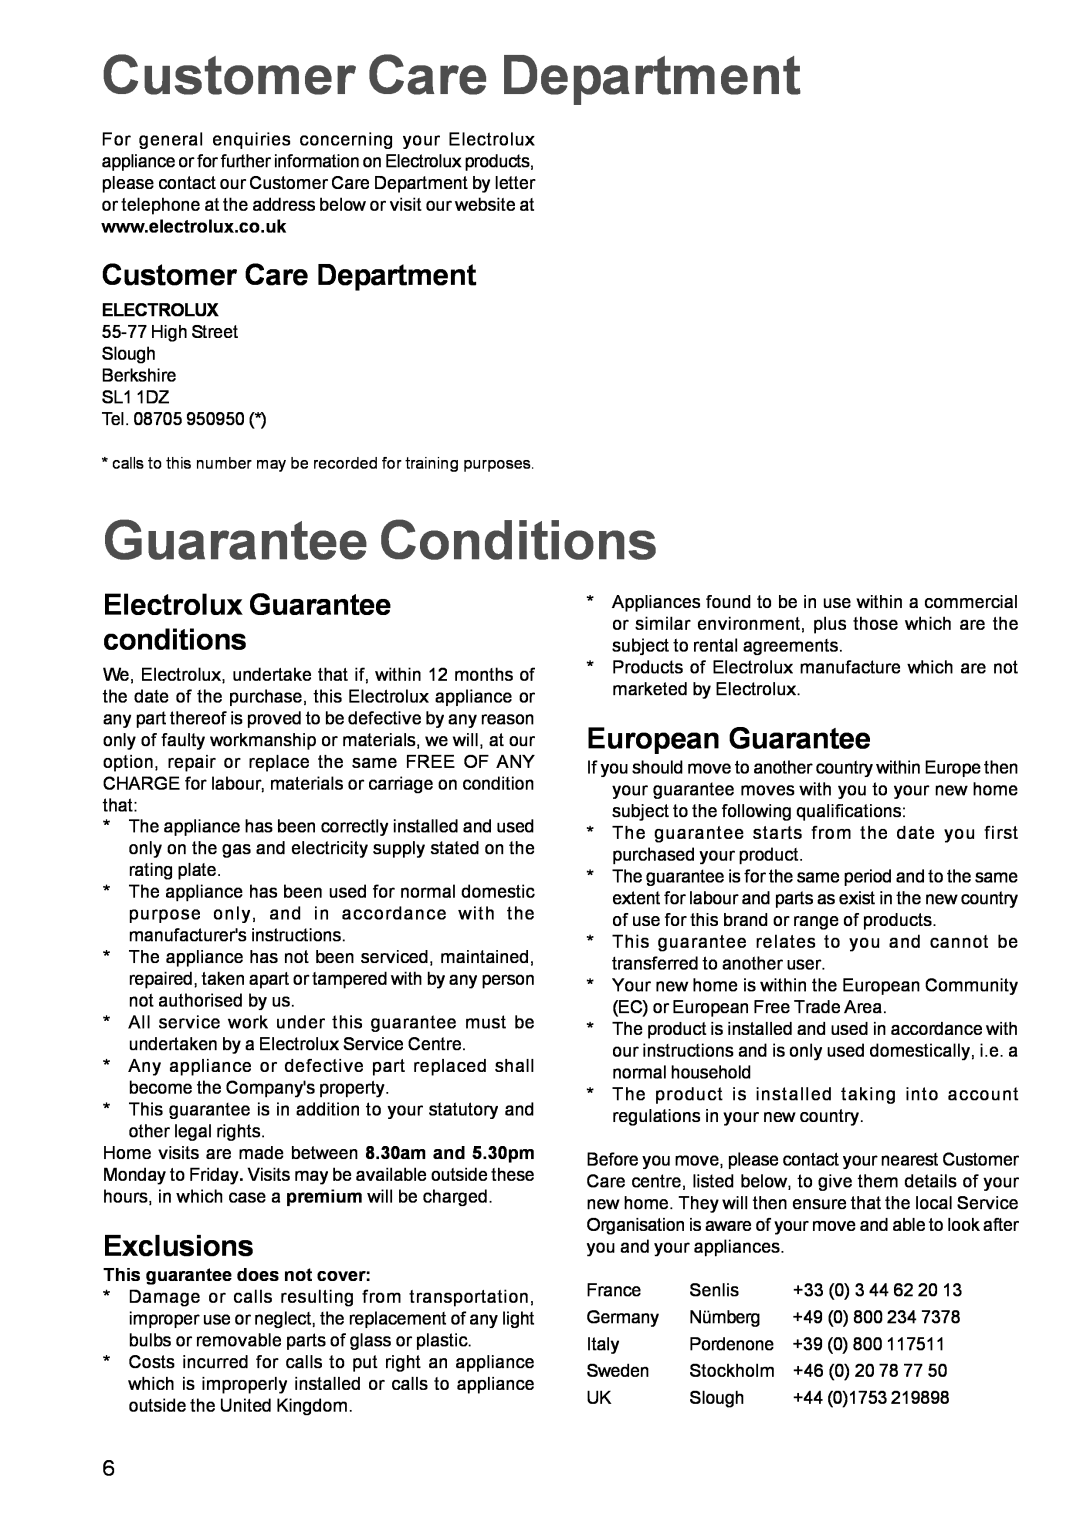 Electrolux EGG 689 manual Customer Care Department, Guarantee Conditions, Electrolux Guarantee conditions, Exclusions 